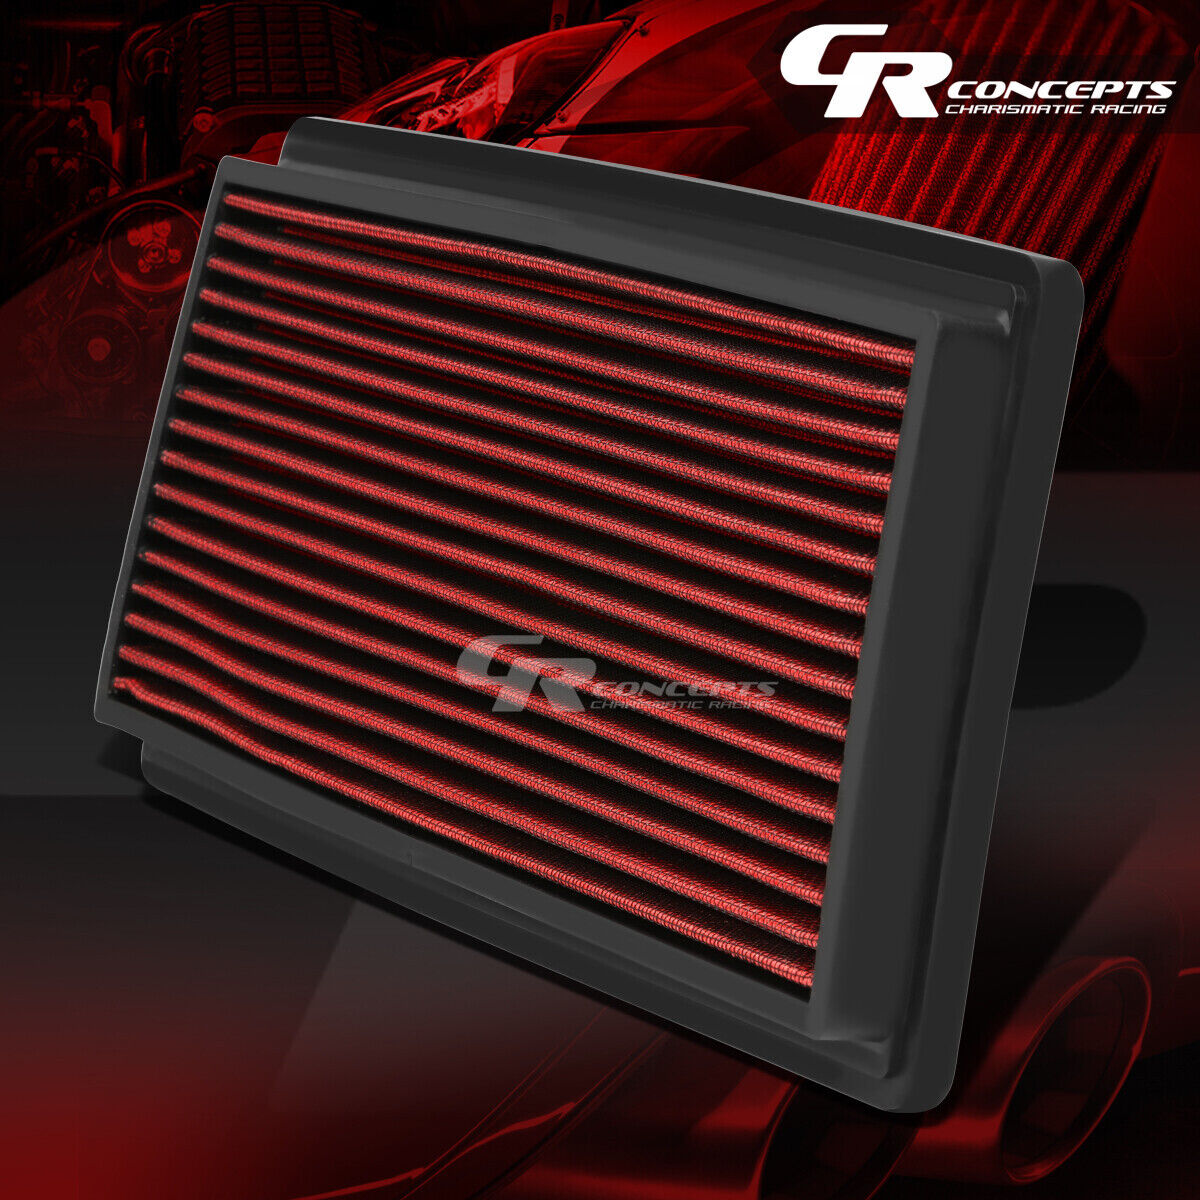 RED WASHABLE HIGH FLOW AIR FILTER PANEL FOR 96-01 JEEP CHEROKEE XJ 2.5L 4.0L